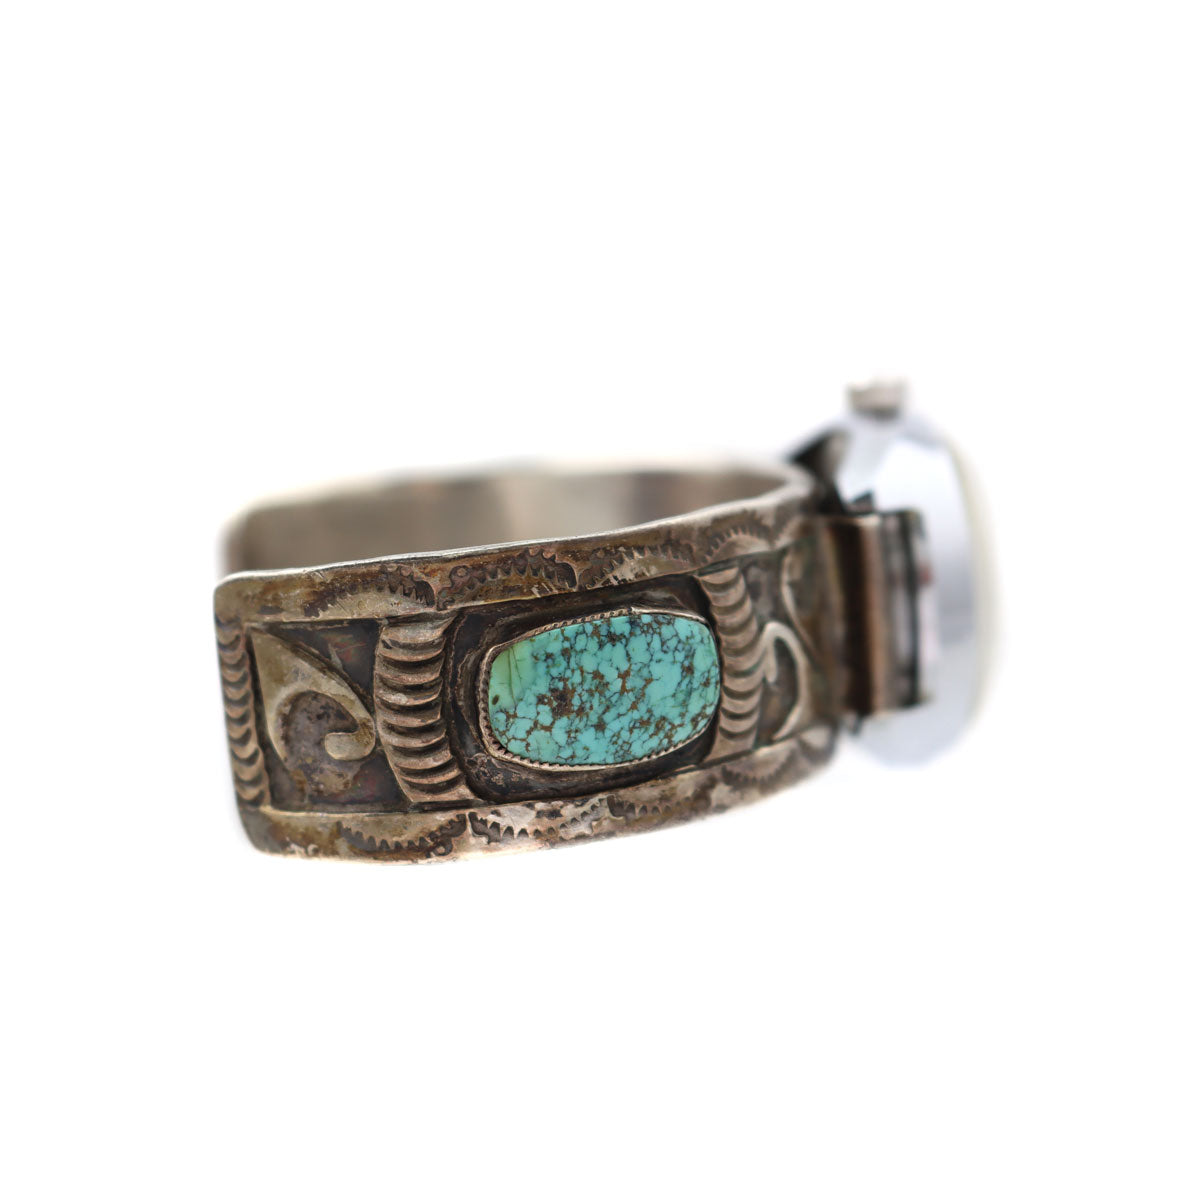 Navajo Turquoise and Silver Watch Bracelet c. 1950s, size 6.75 (J14409-CO-005)4